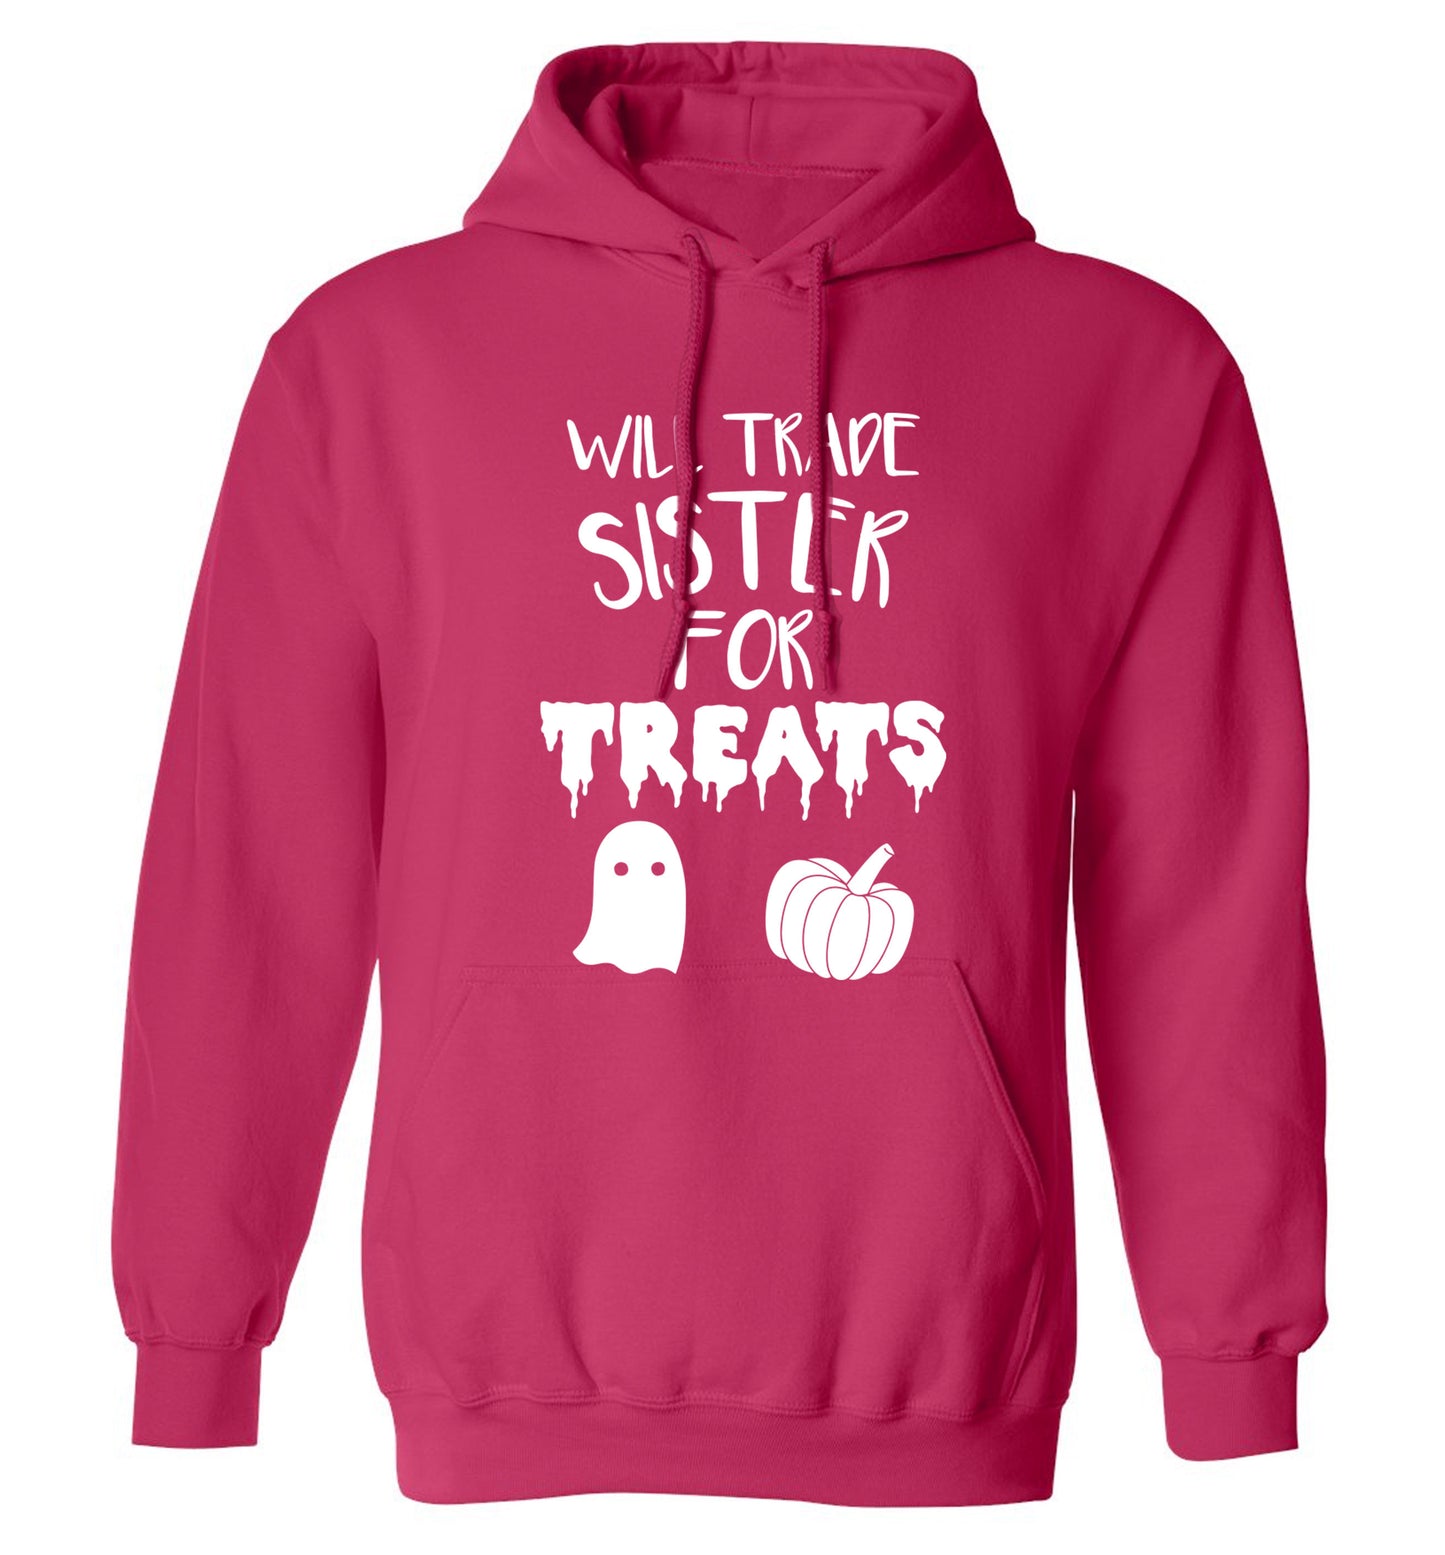 Will trade sister for treats adults unisex pink hoodie 2XL